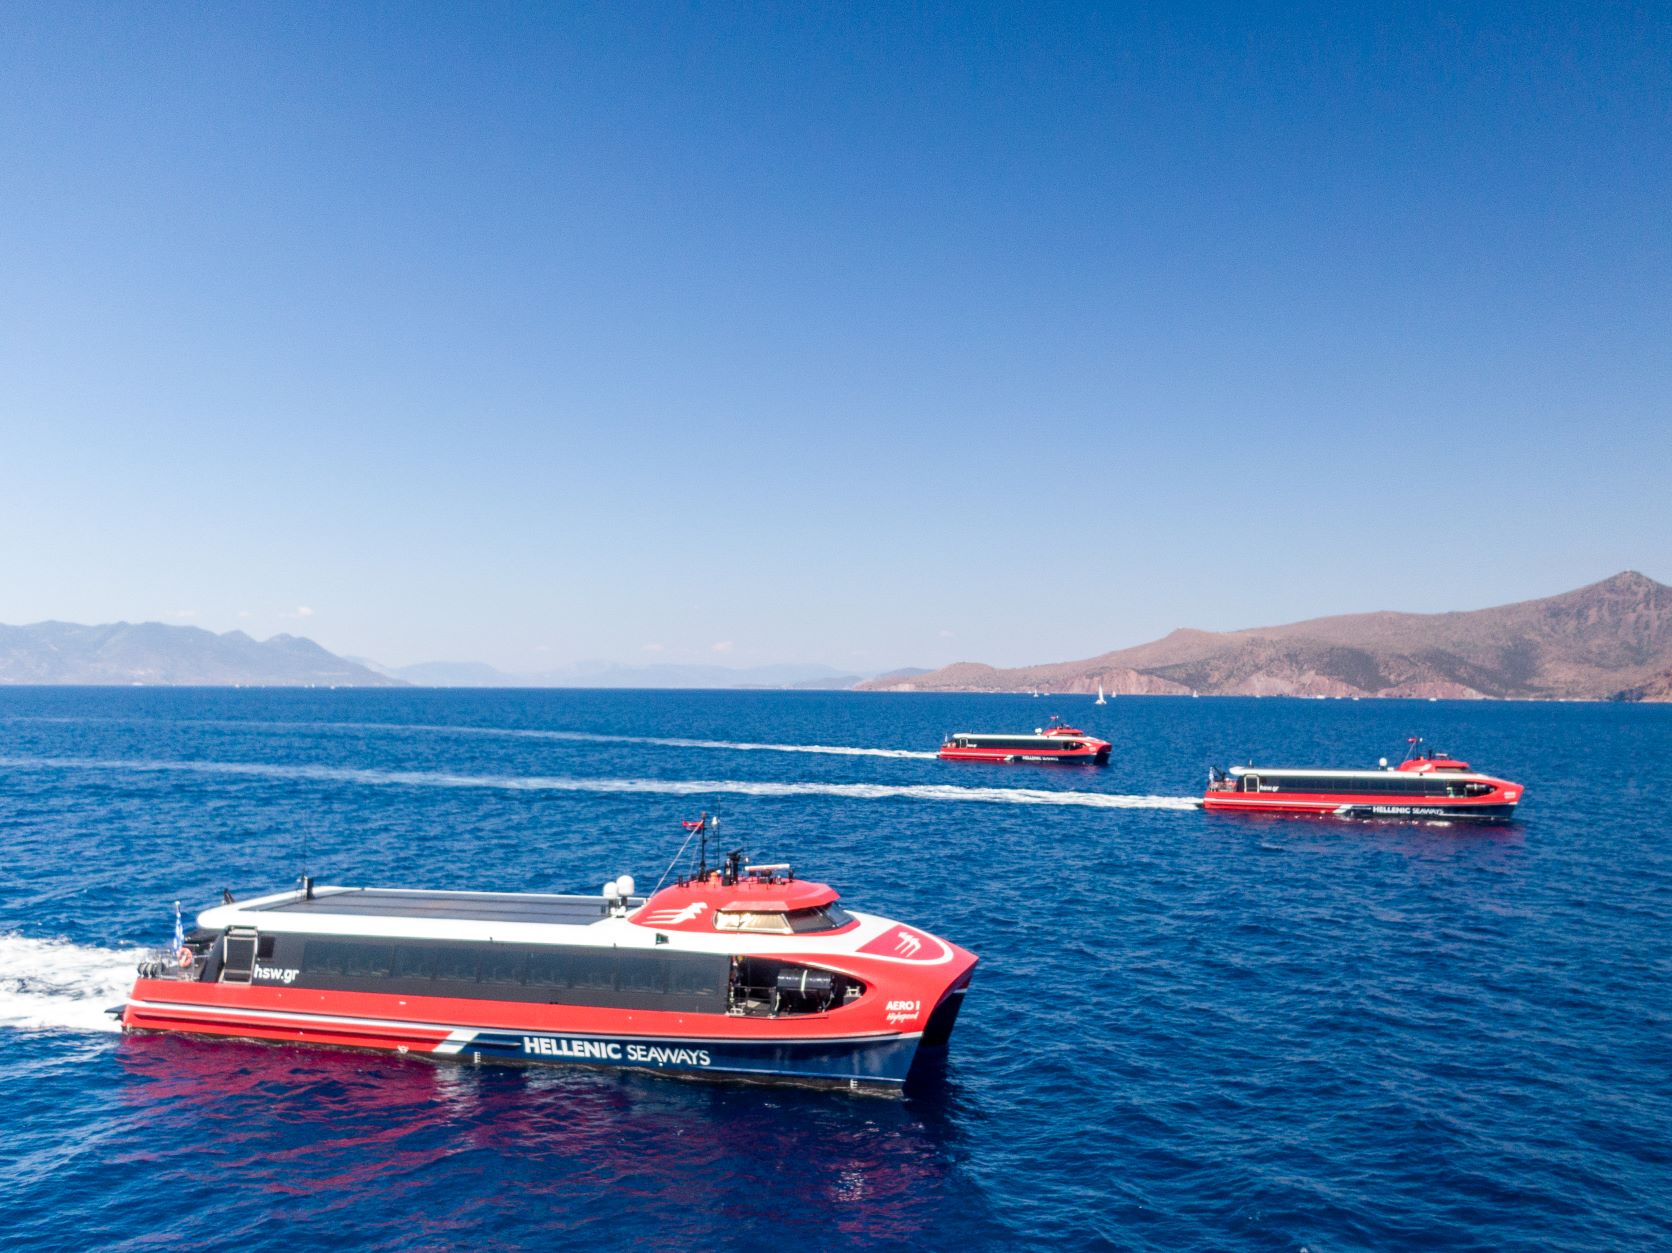 The Aero Highspeed Catamarans commence voyages in the Saronic islands